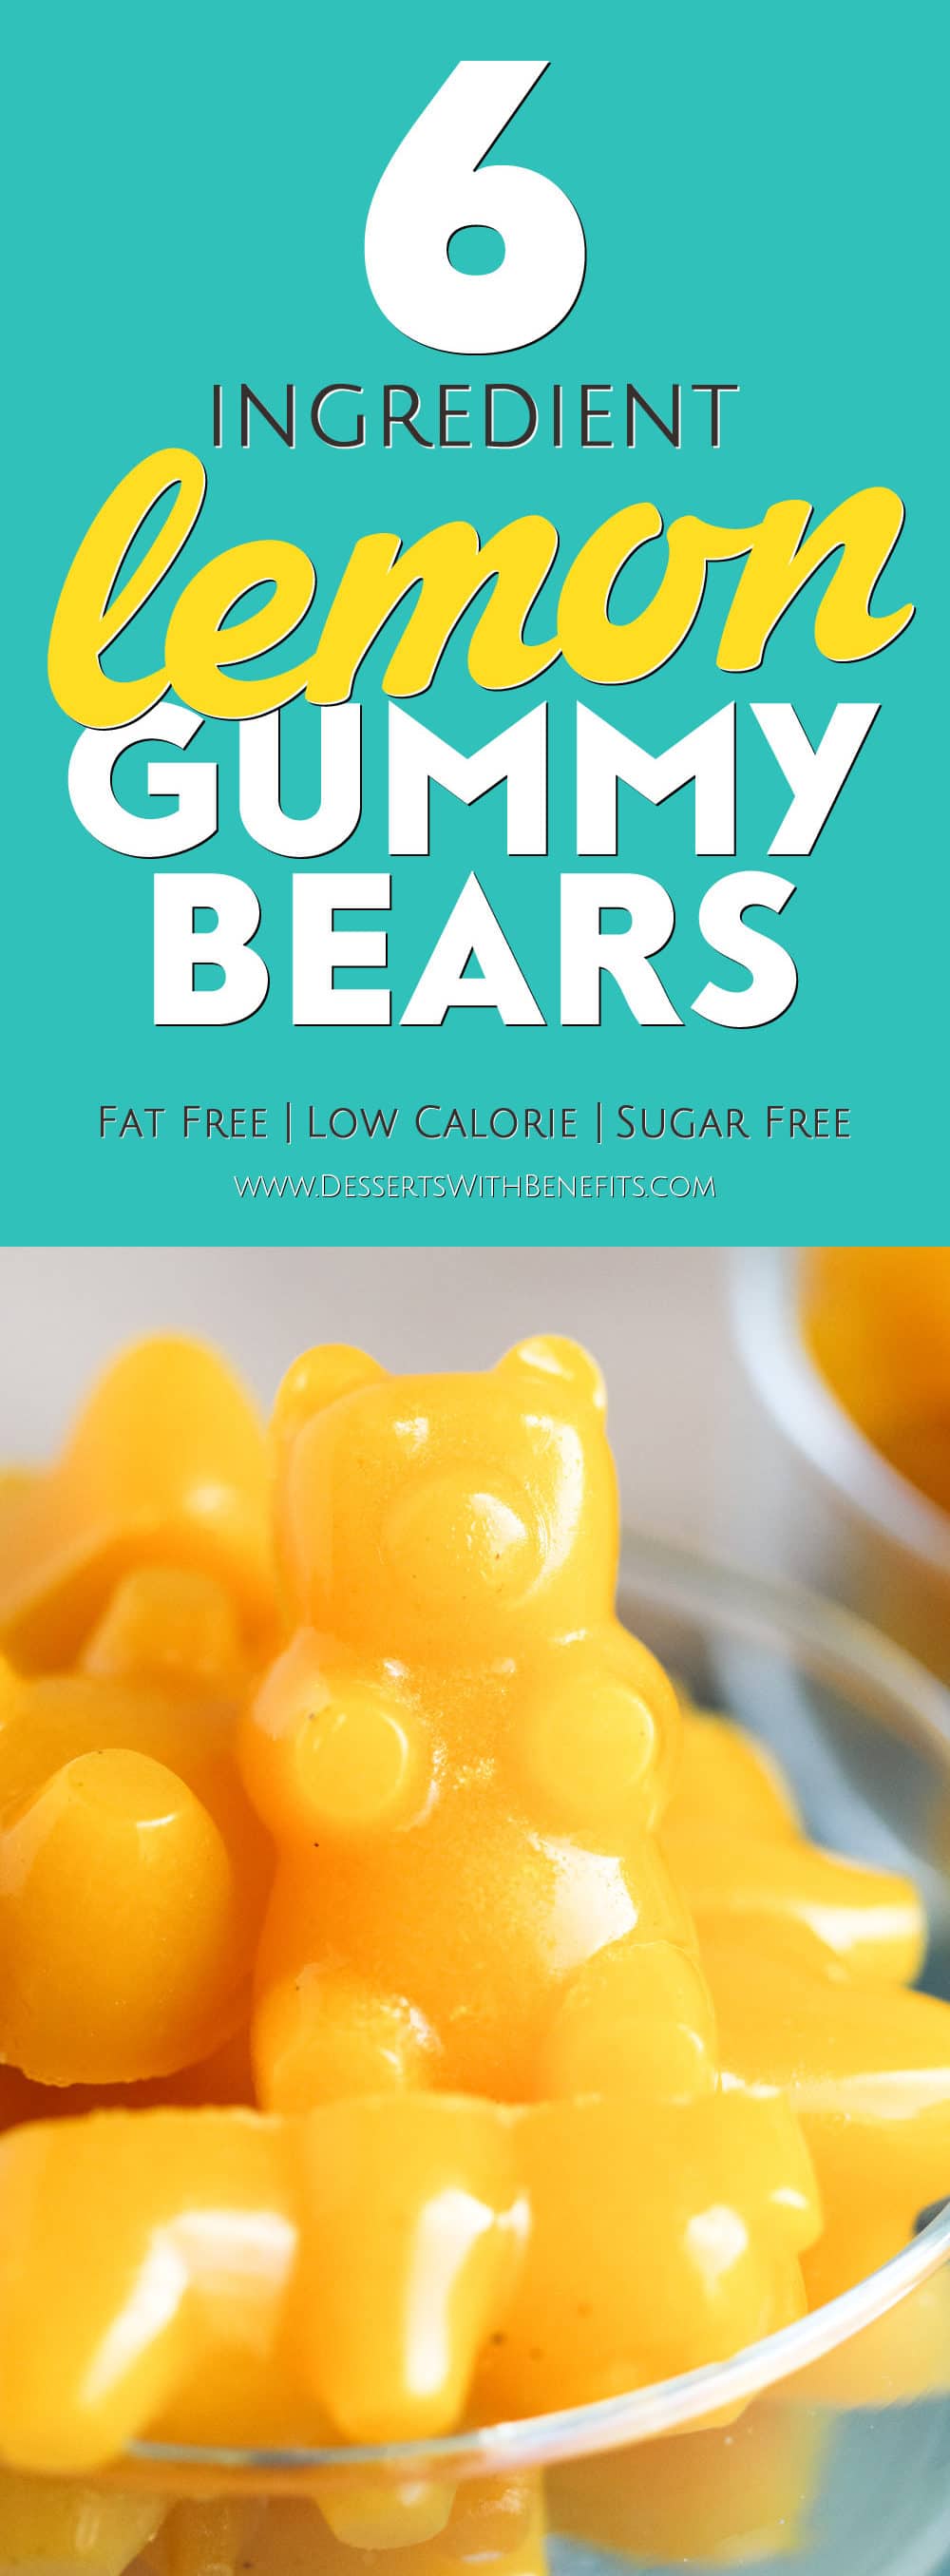 These Healthy Homemade Lemon Gummy Bears taste EVEN BETTER than the storebought version – they’re chewy and gummy, tart and sweet, and totally guilt-free. This easy DIY recipe is made without refined sugar, high fructose corn syrup, and preservatives! -- Healthy Dessert Recipes with sugar free, low calorie, low fat, high protein, gluten free, and dairy free options at the Desserts With Benefits Blog (www.DessertsWithBenefits.com)